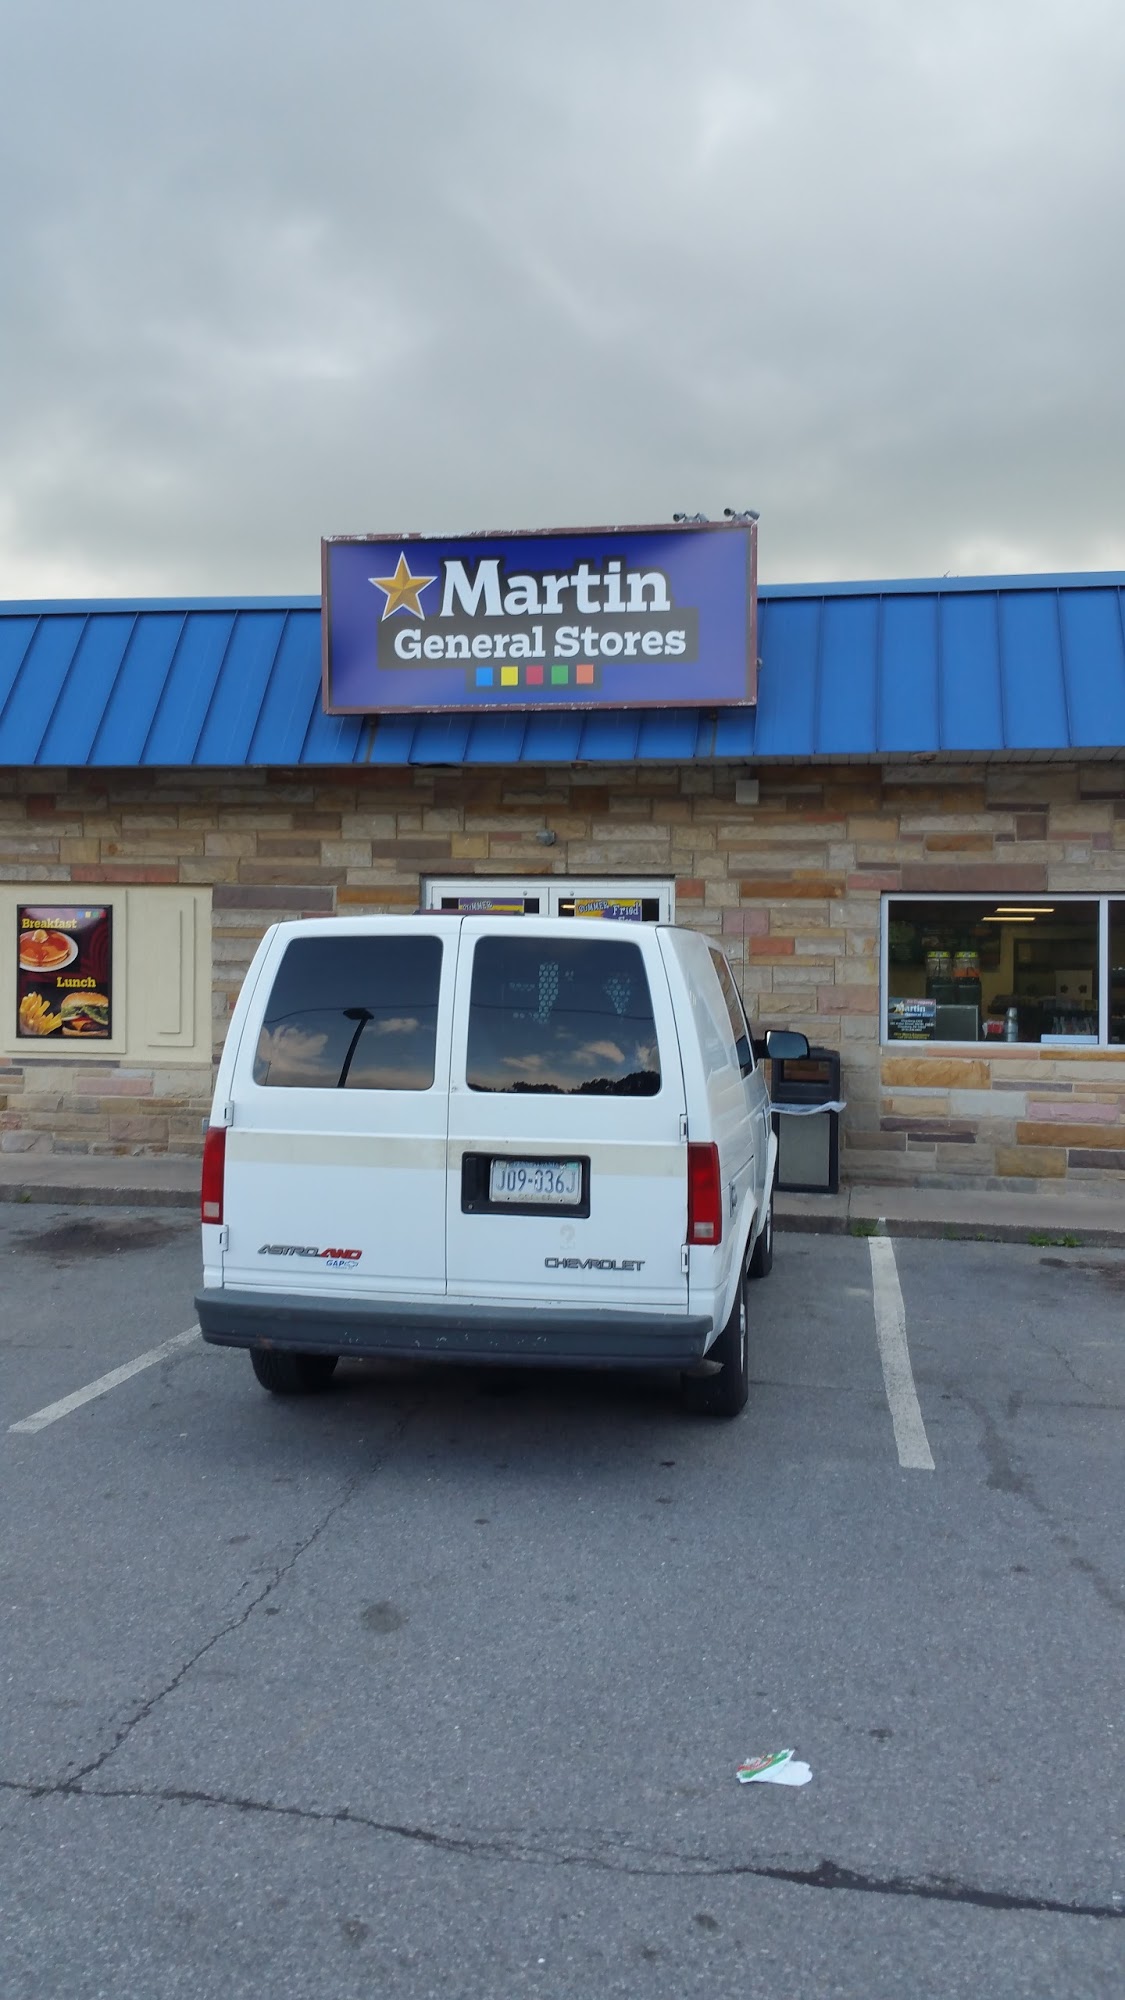 Martin General Stores